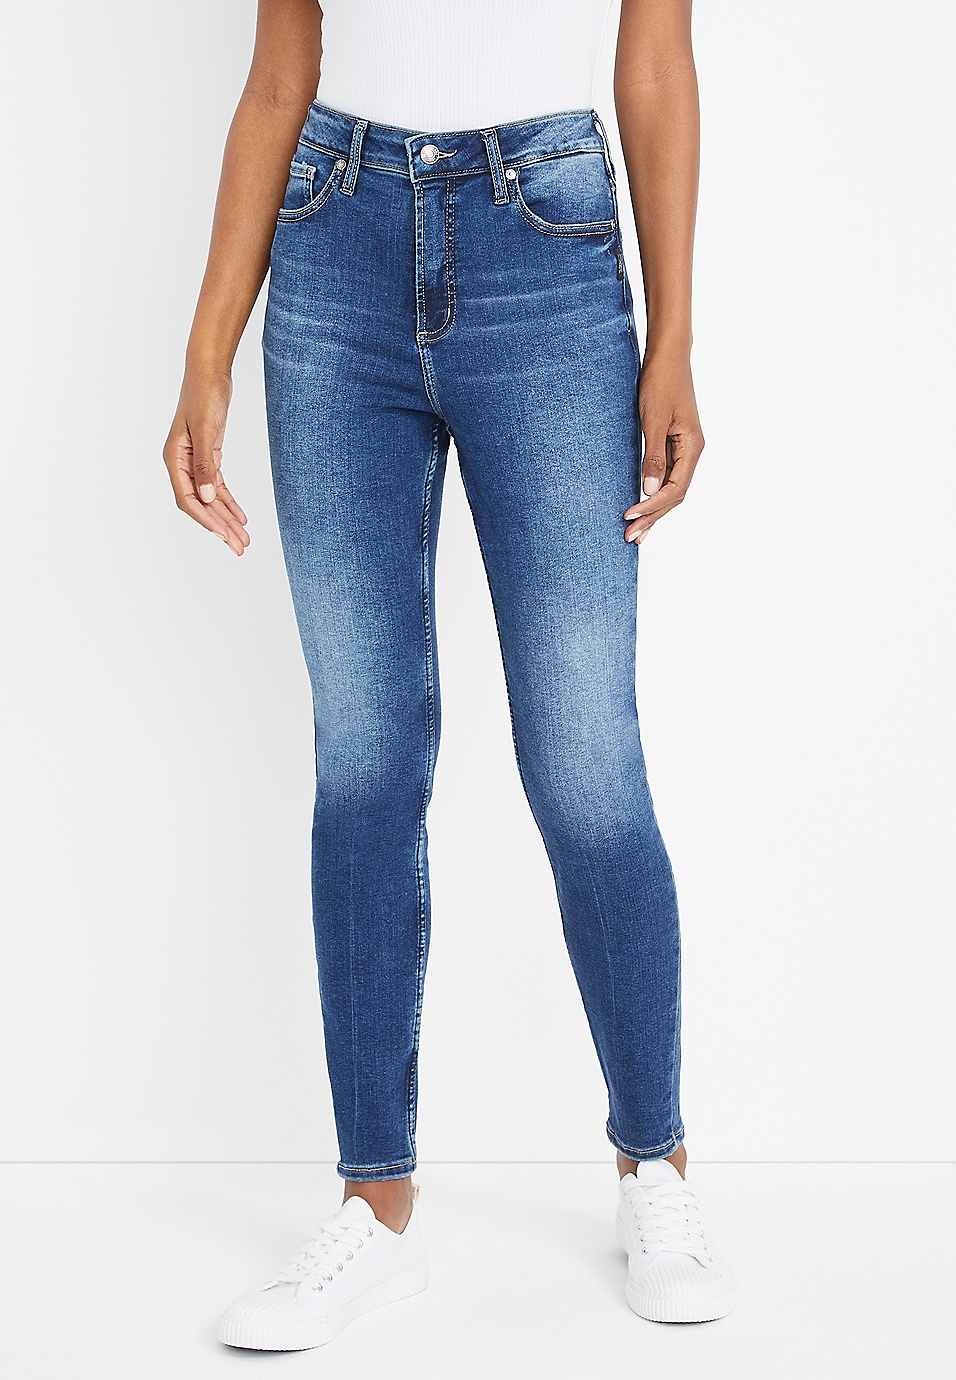 New Silver Jeans Co. Denim Fits Up to Four Waist Sizes